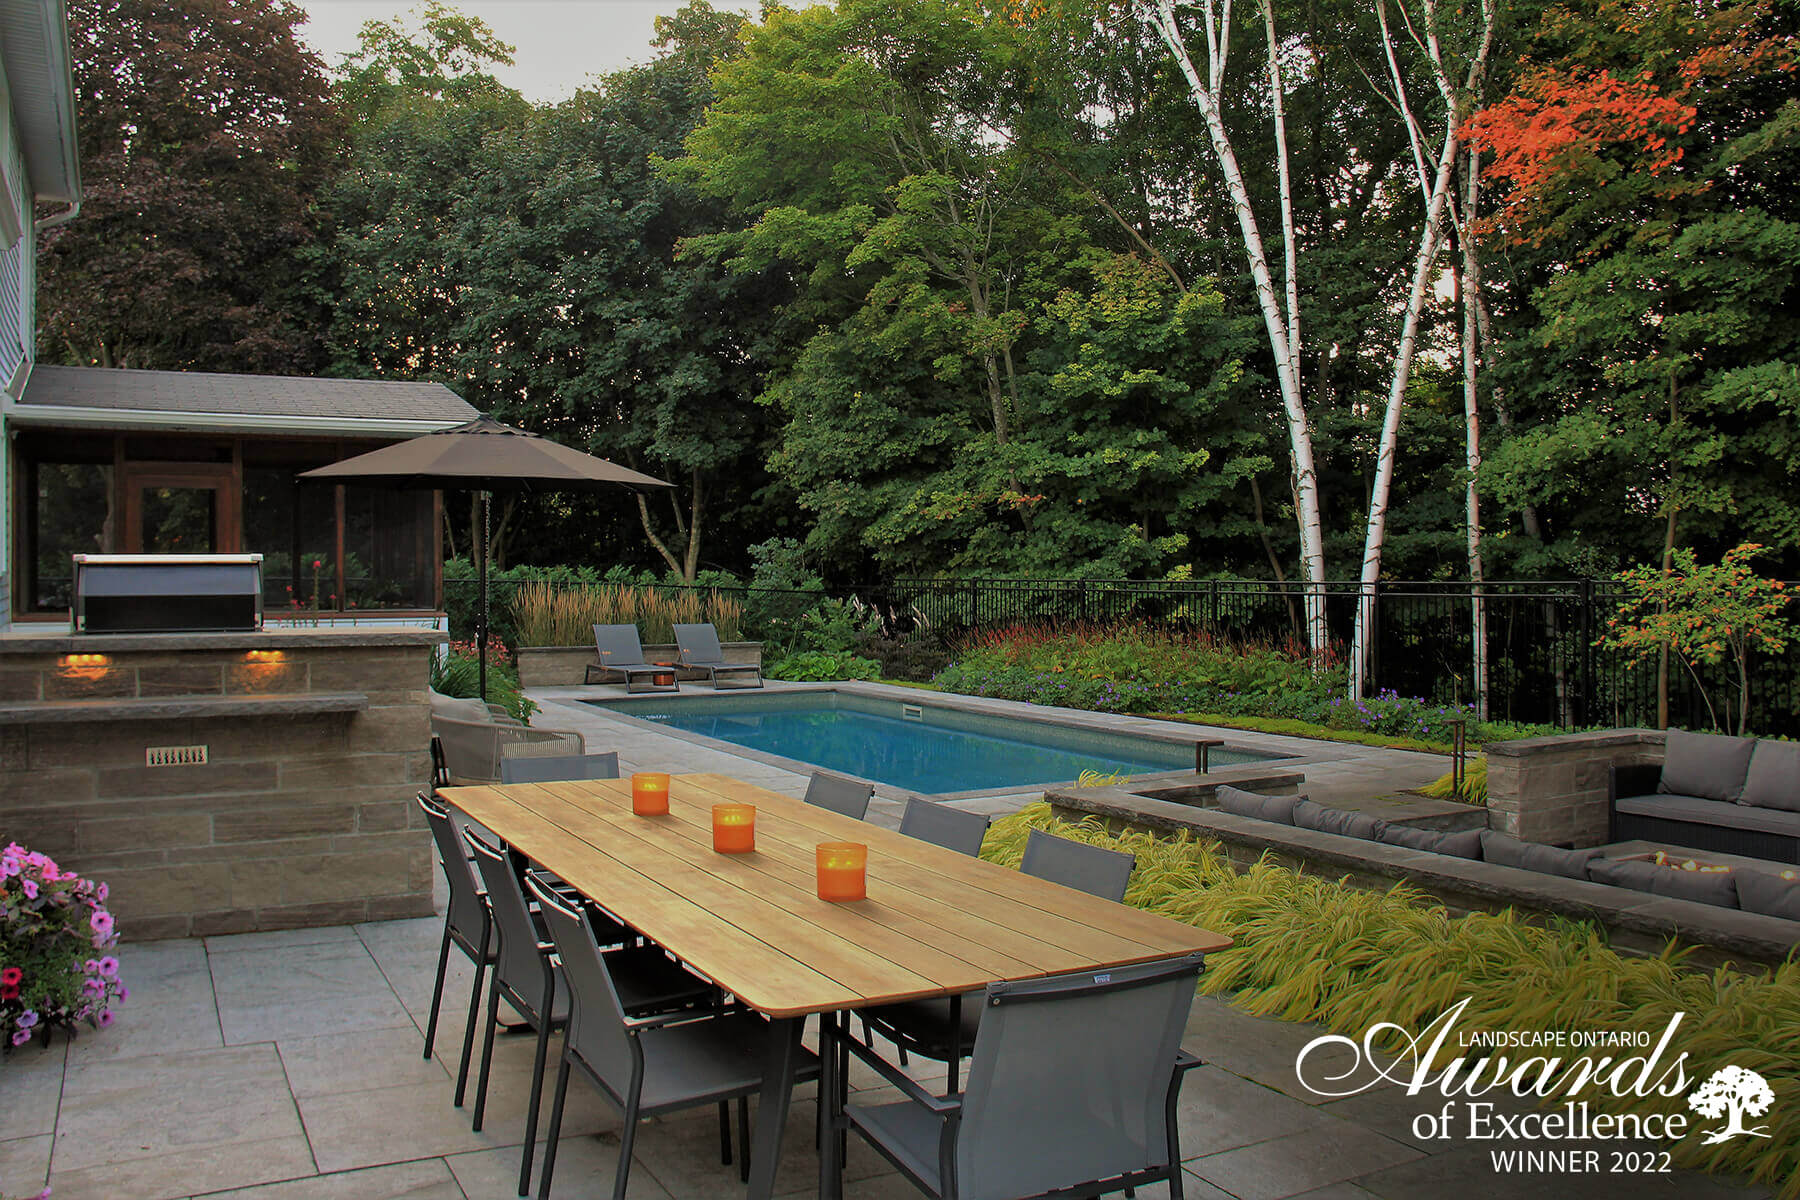 Beautiful Landscape Backyard design to cater to all for swimning dining and sitting by a nice fire pit